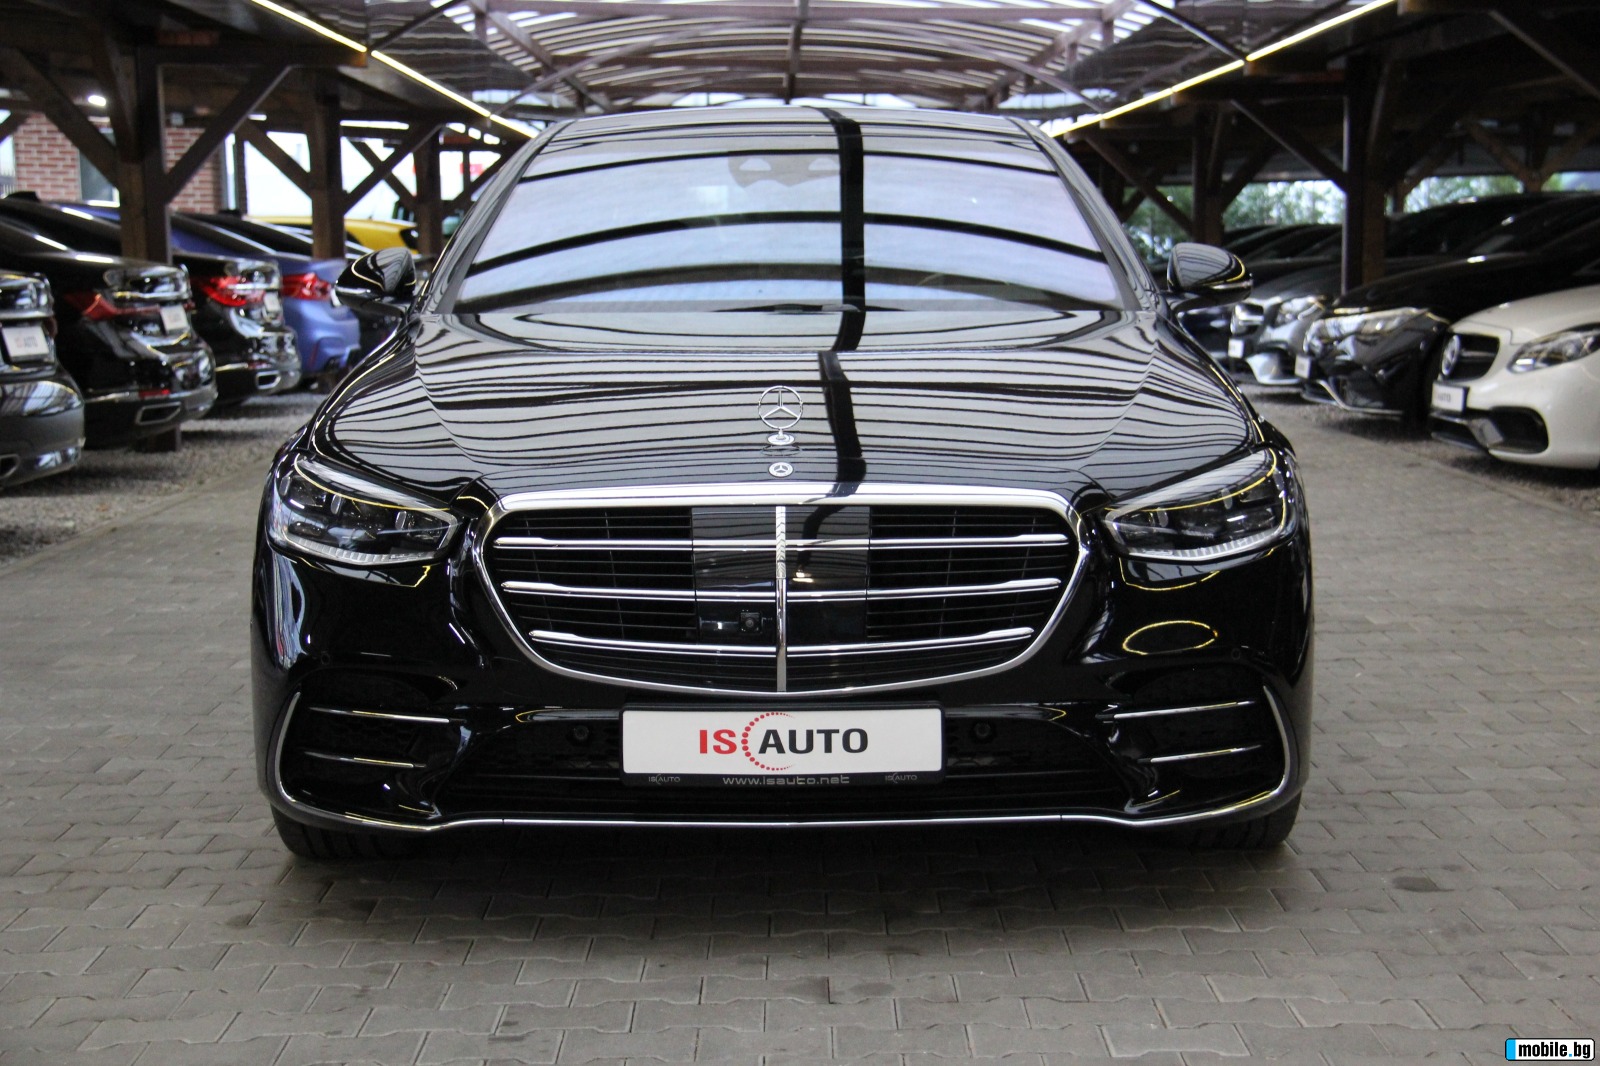 Mercedes-Benz S580 4Matic/Exclusive/Carbon/Distronic/Pano/AMG/Long | Mobile.bg   2